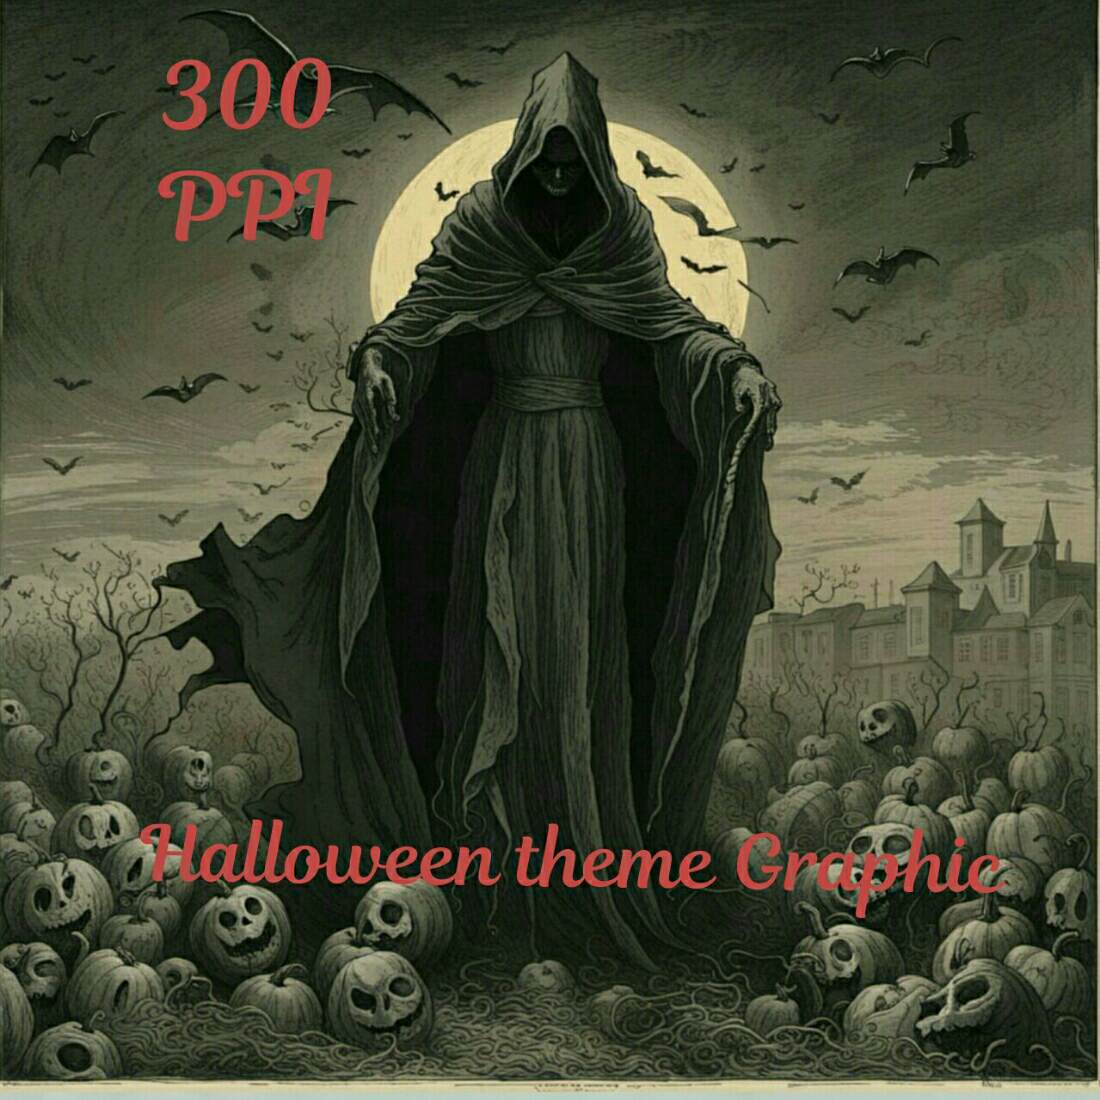 Grim Reaper in a Field of dead Pumpkins: A Spooky Halloween Painting | Digital Downloadable cover image.